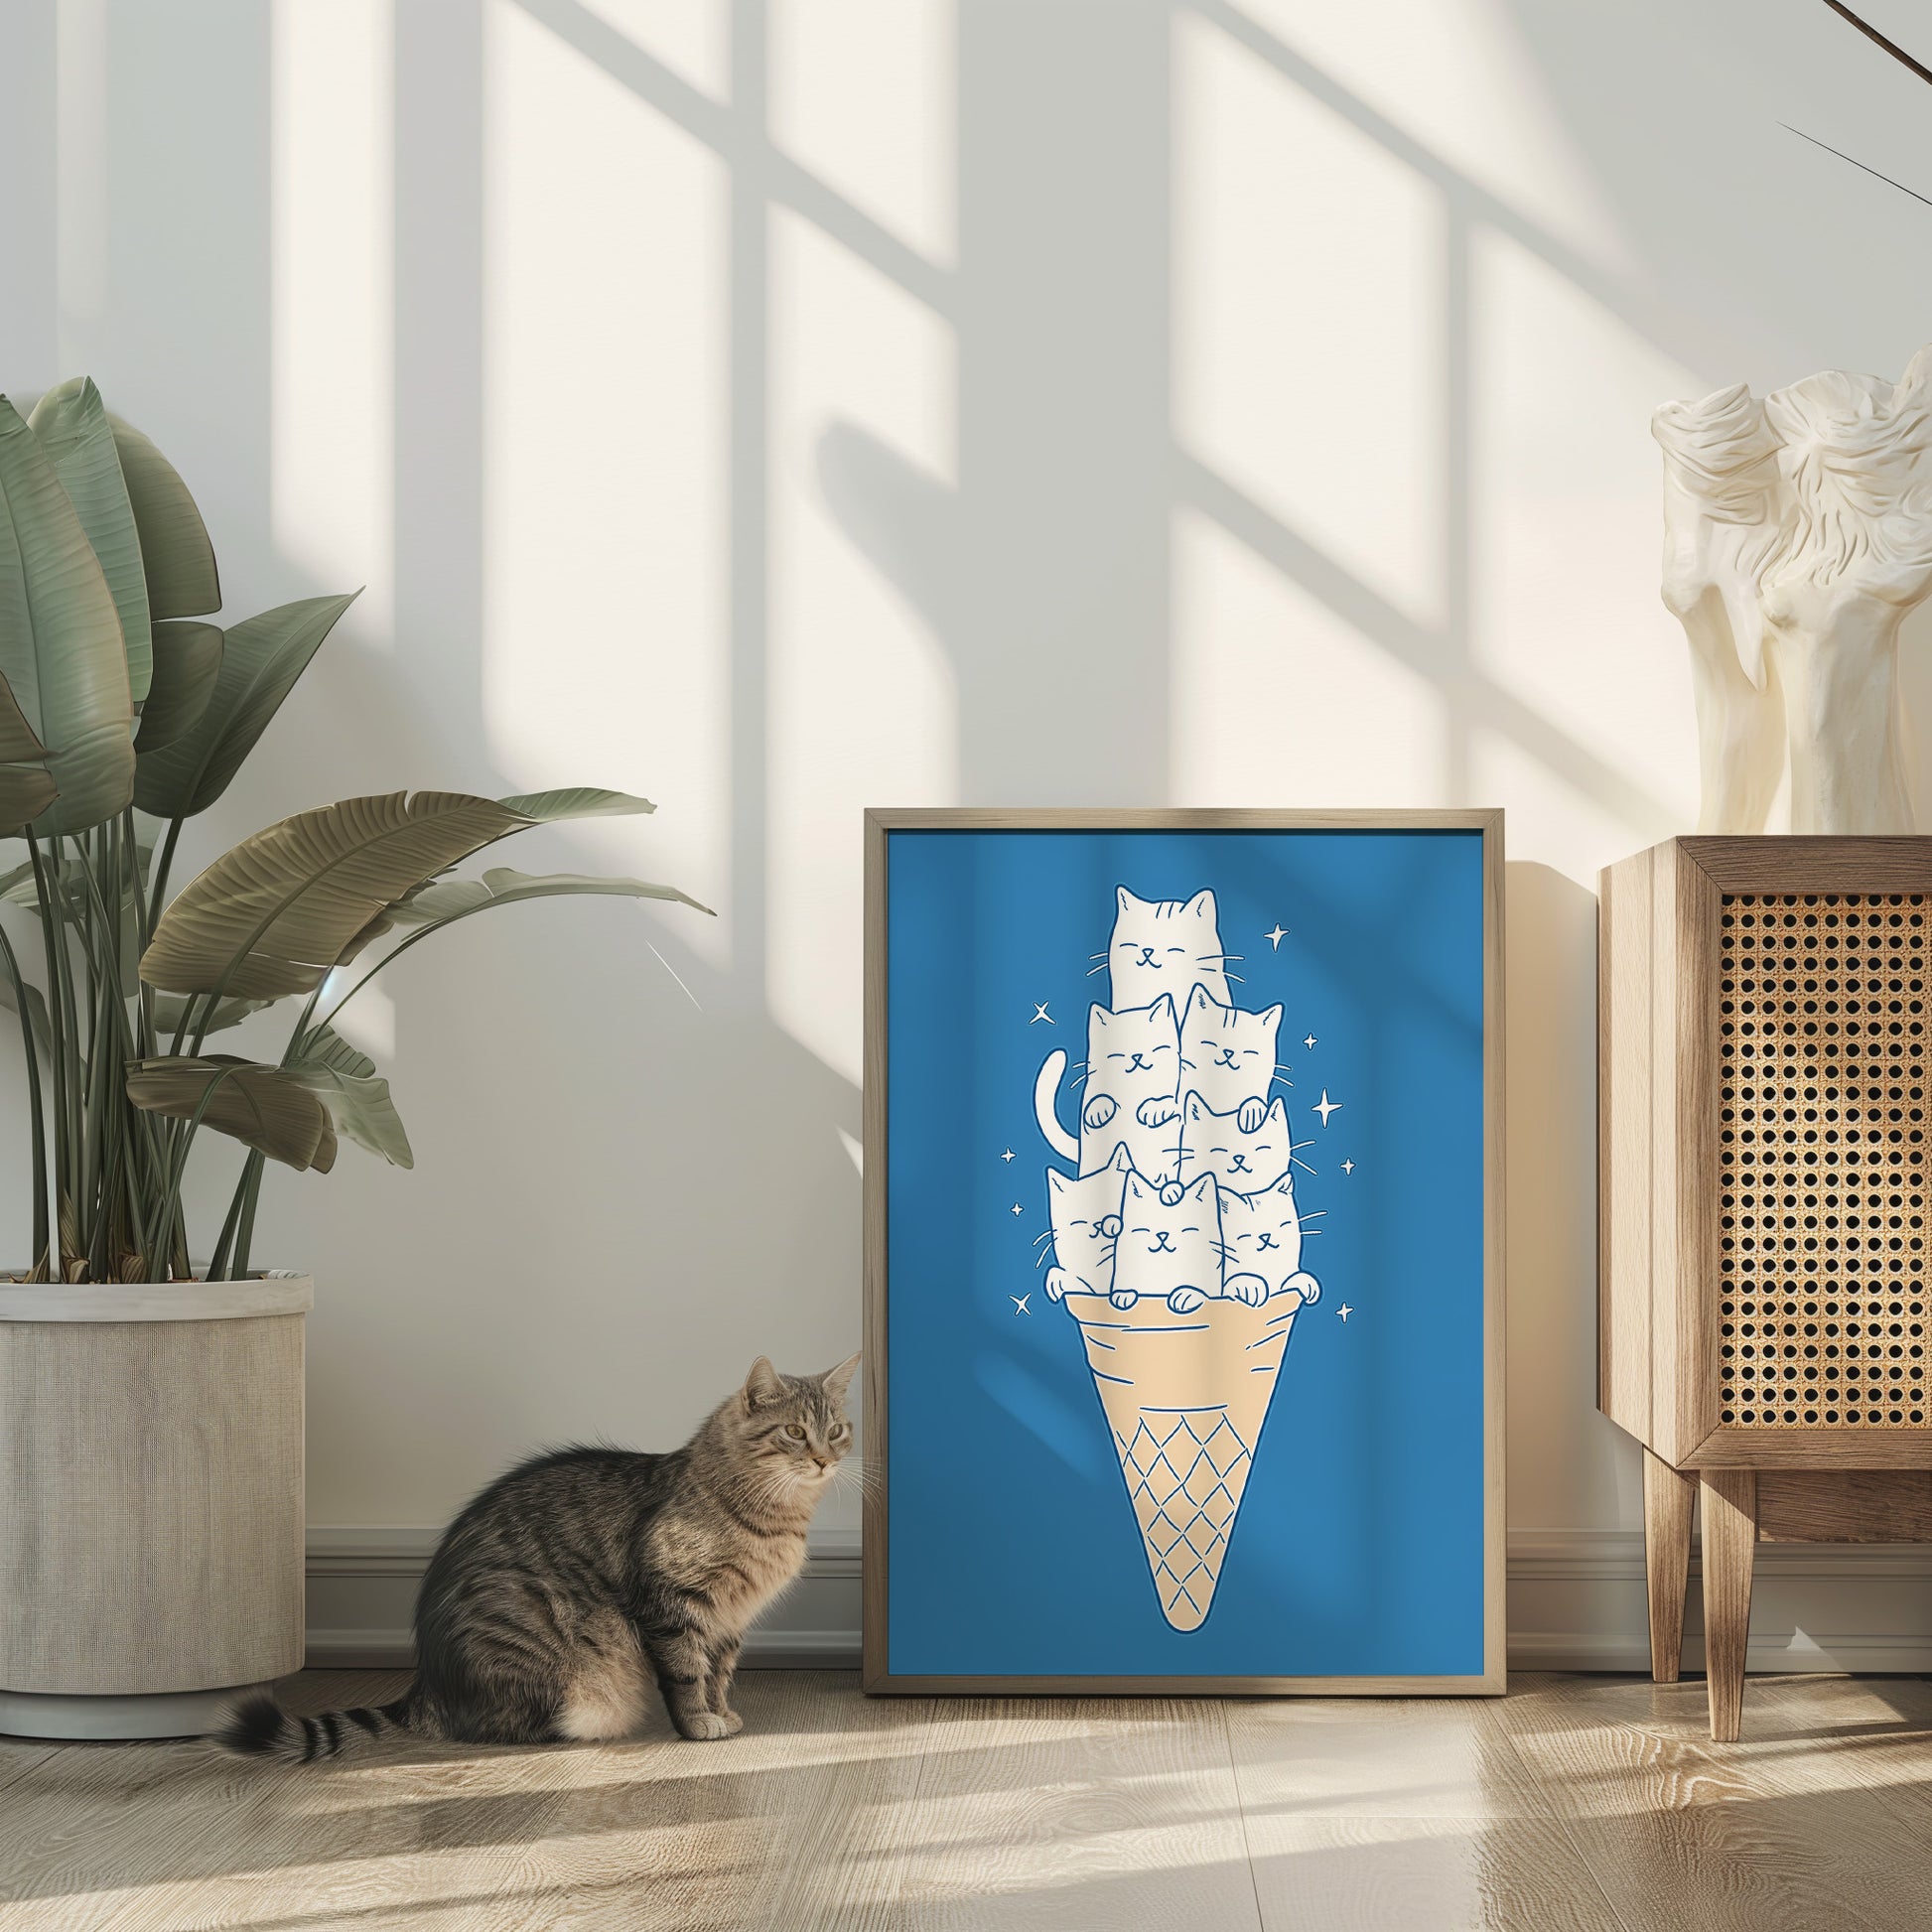 A cat looking at a framed picture of cats stacked in an ice-cream cone.